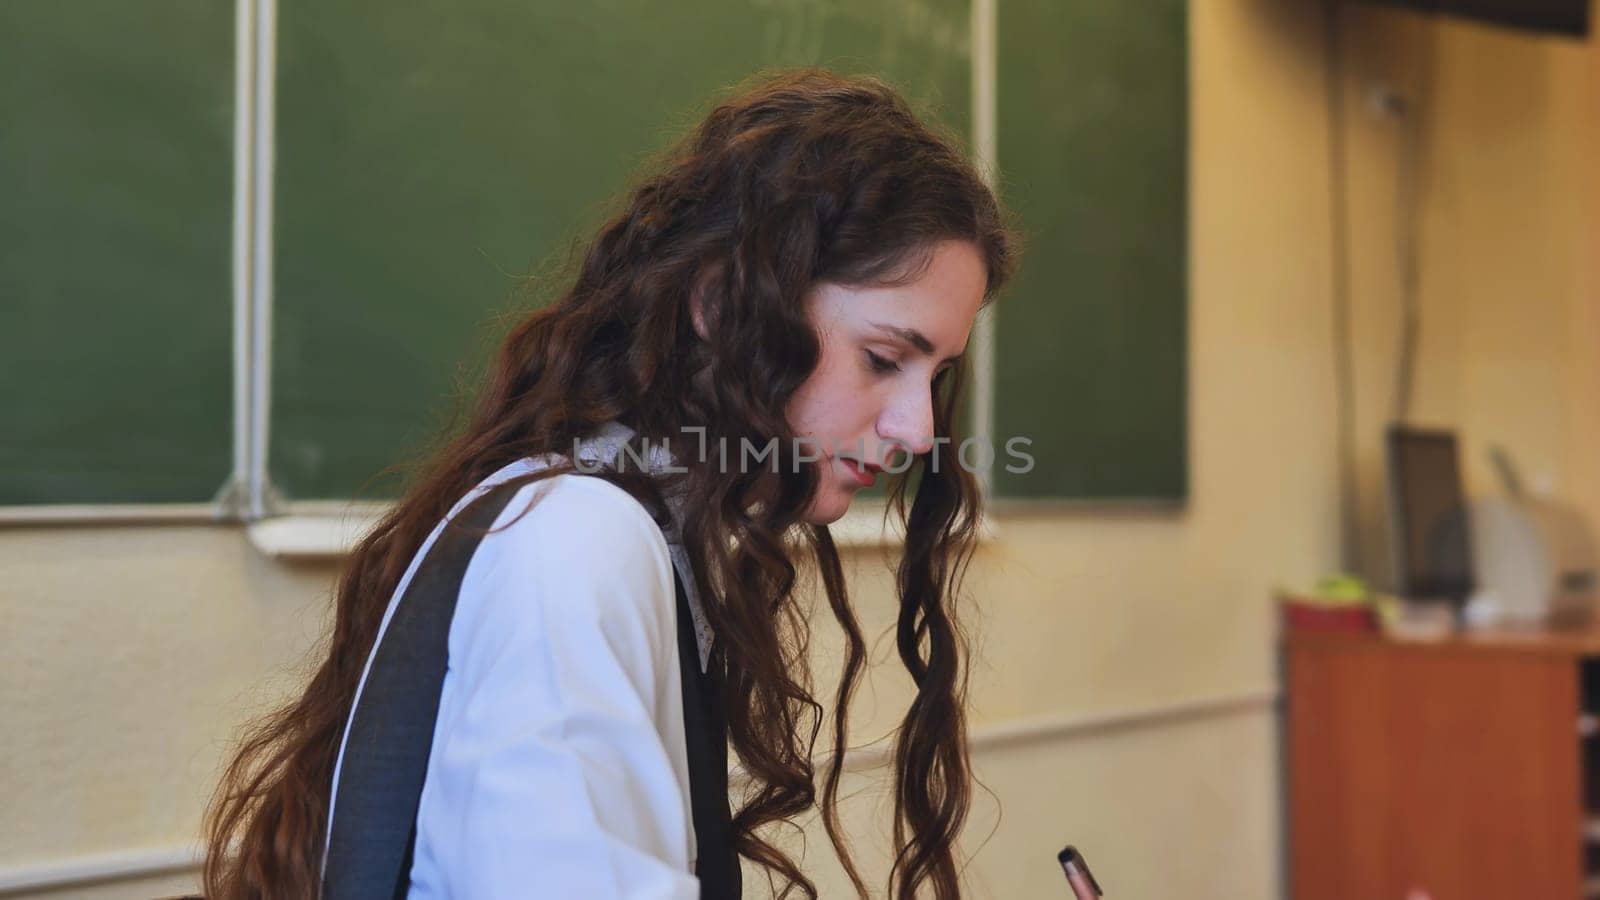 Schoolgirl as a teacher sits at a desk and writes something